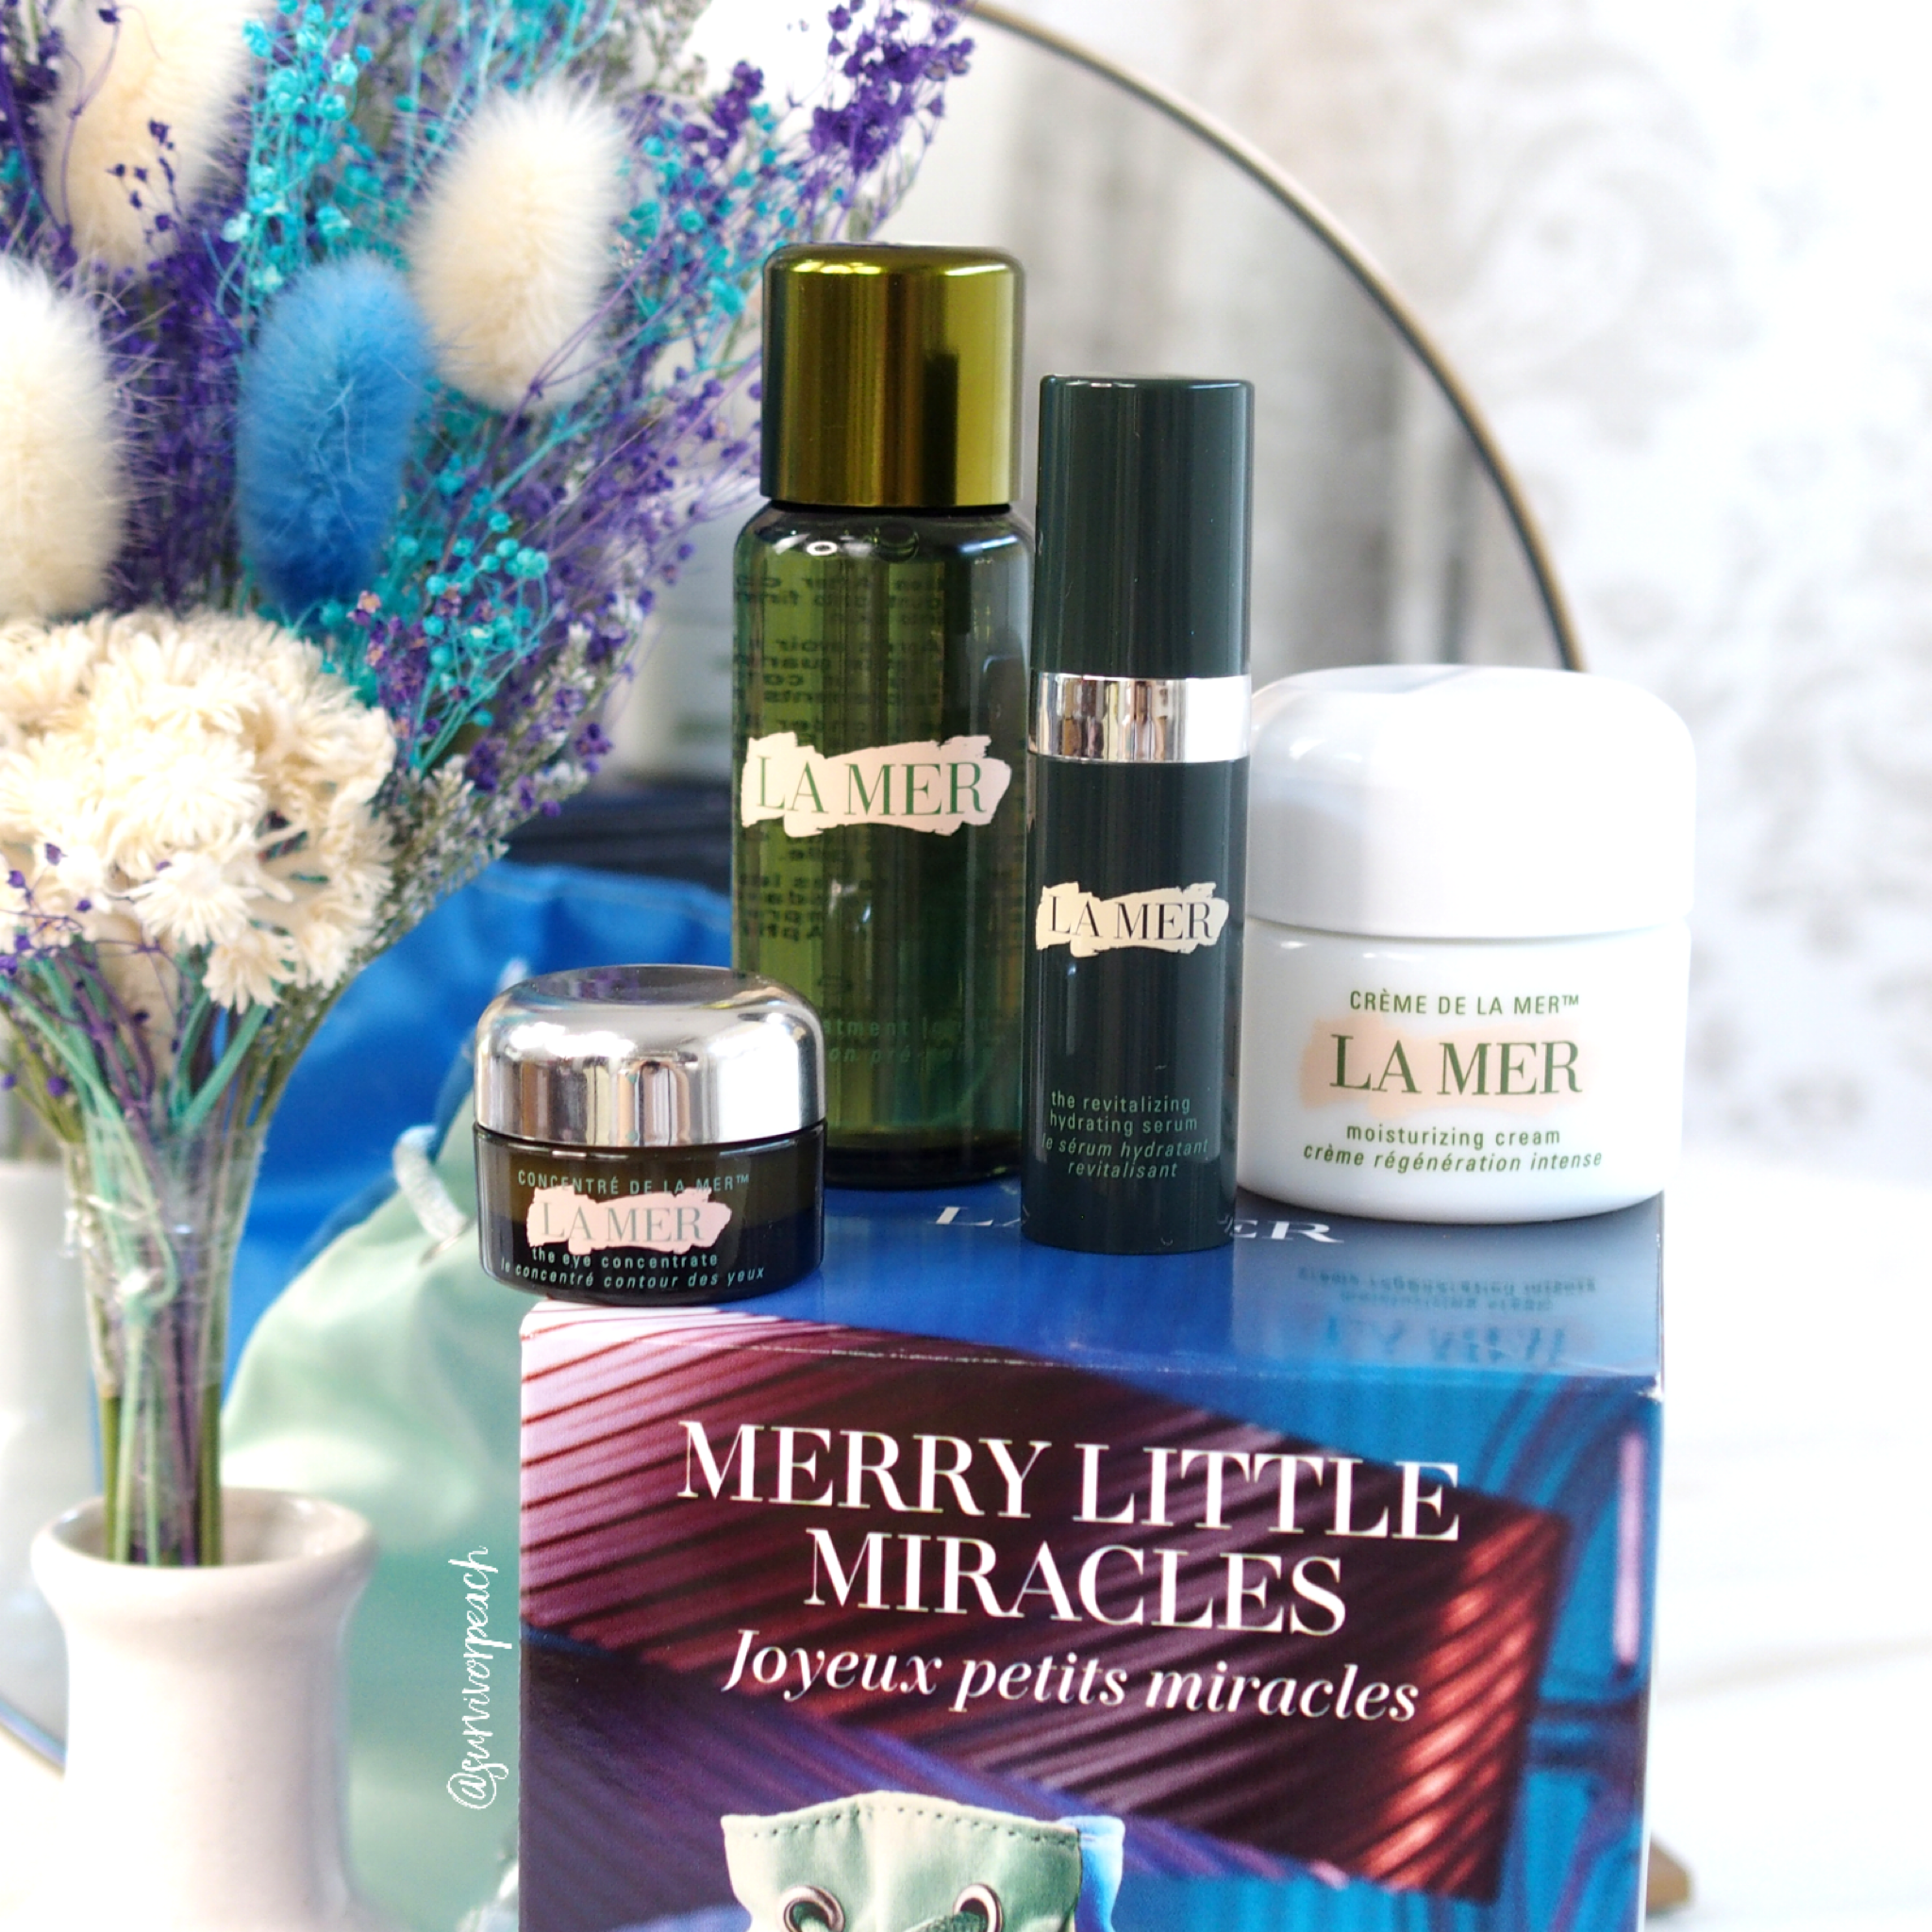 Lamer Merry Little Miracles - Treatment Lotion, Revitalizing